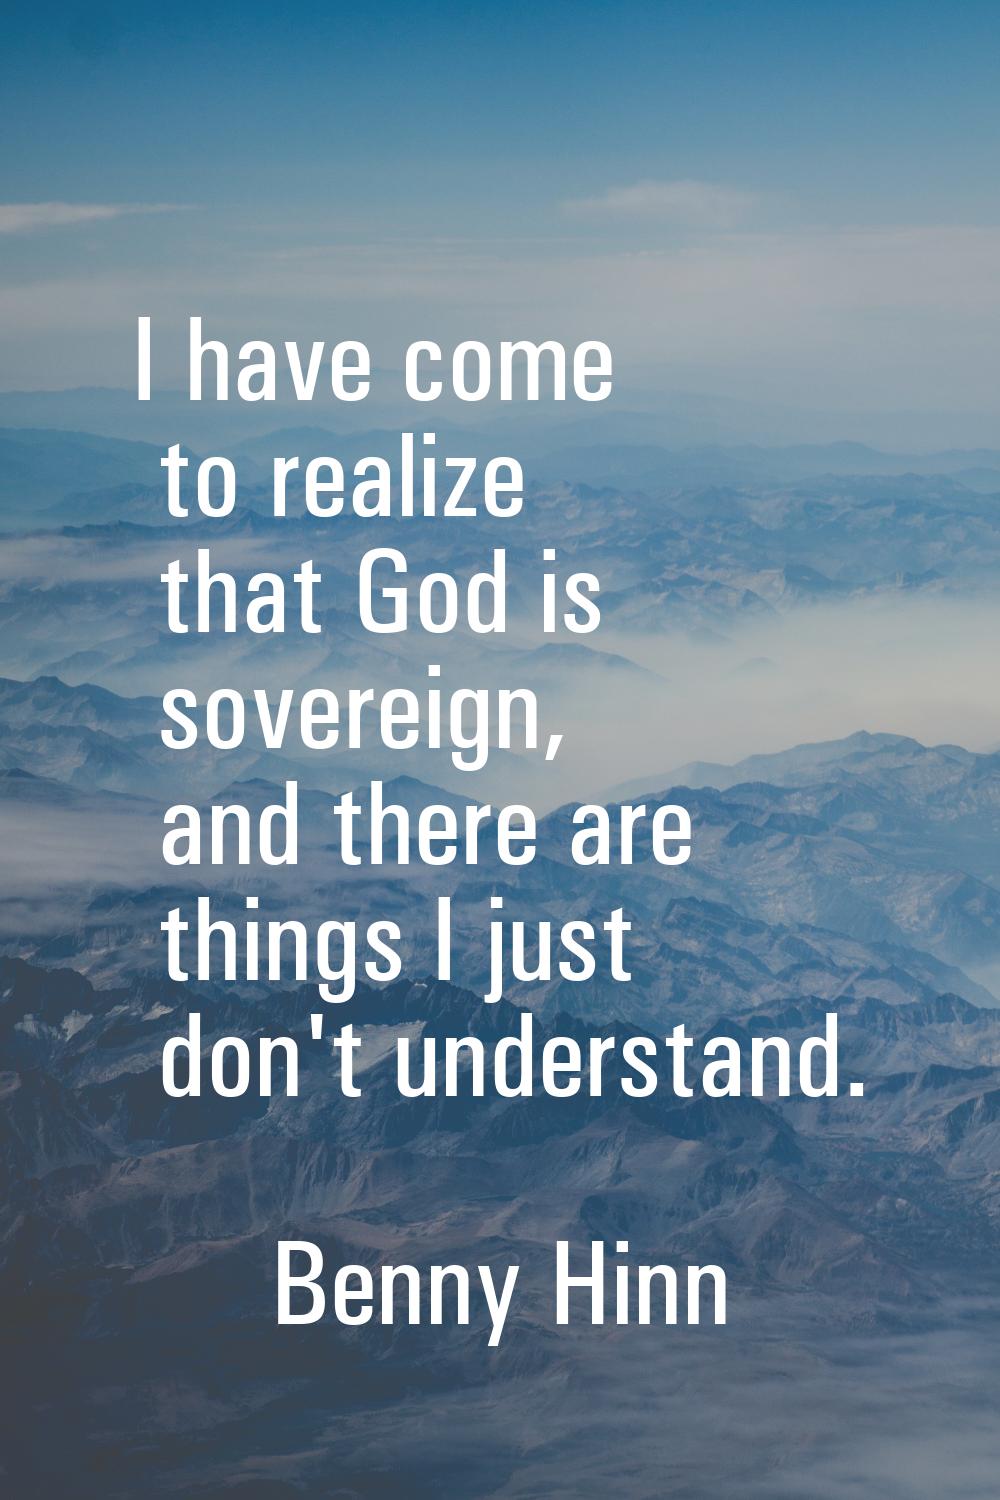 I have come to realize that God is sovereign, and there are things I just don't understand.